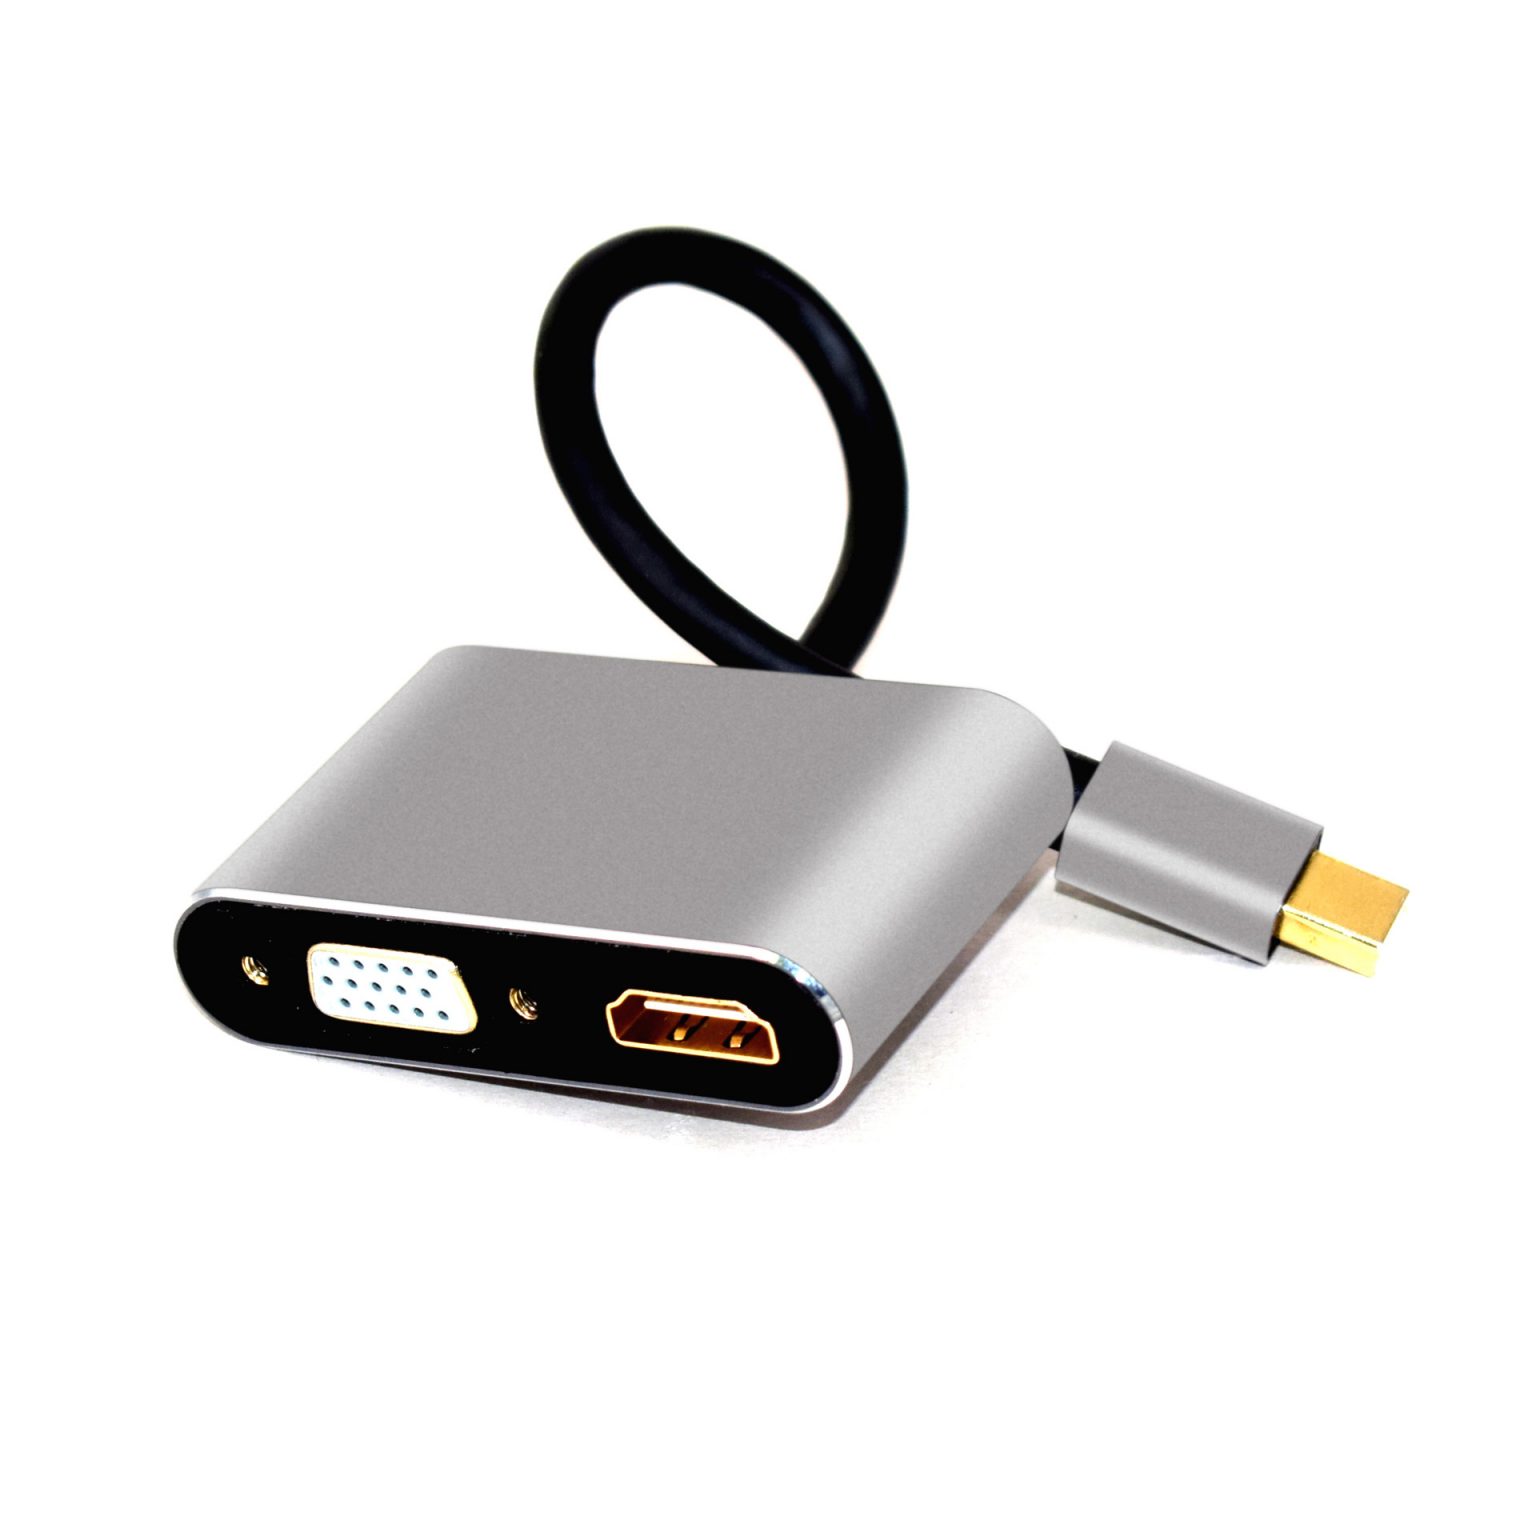 thunderbolt 2 to hdmi cable